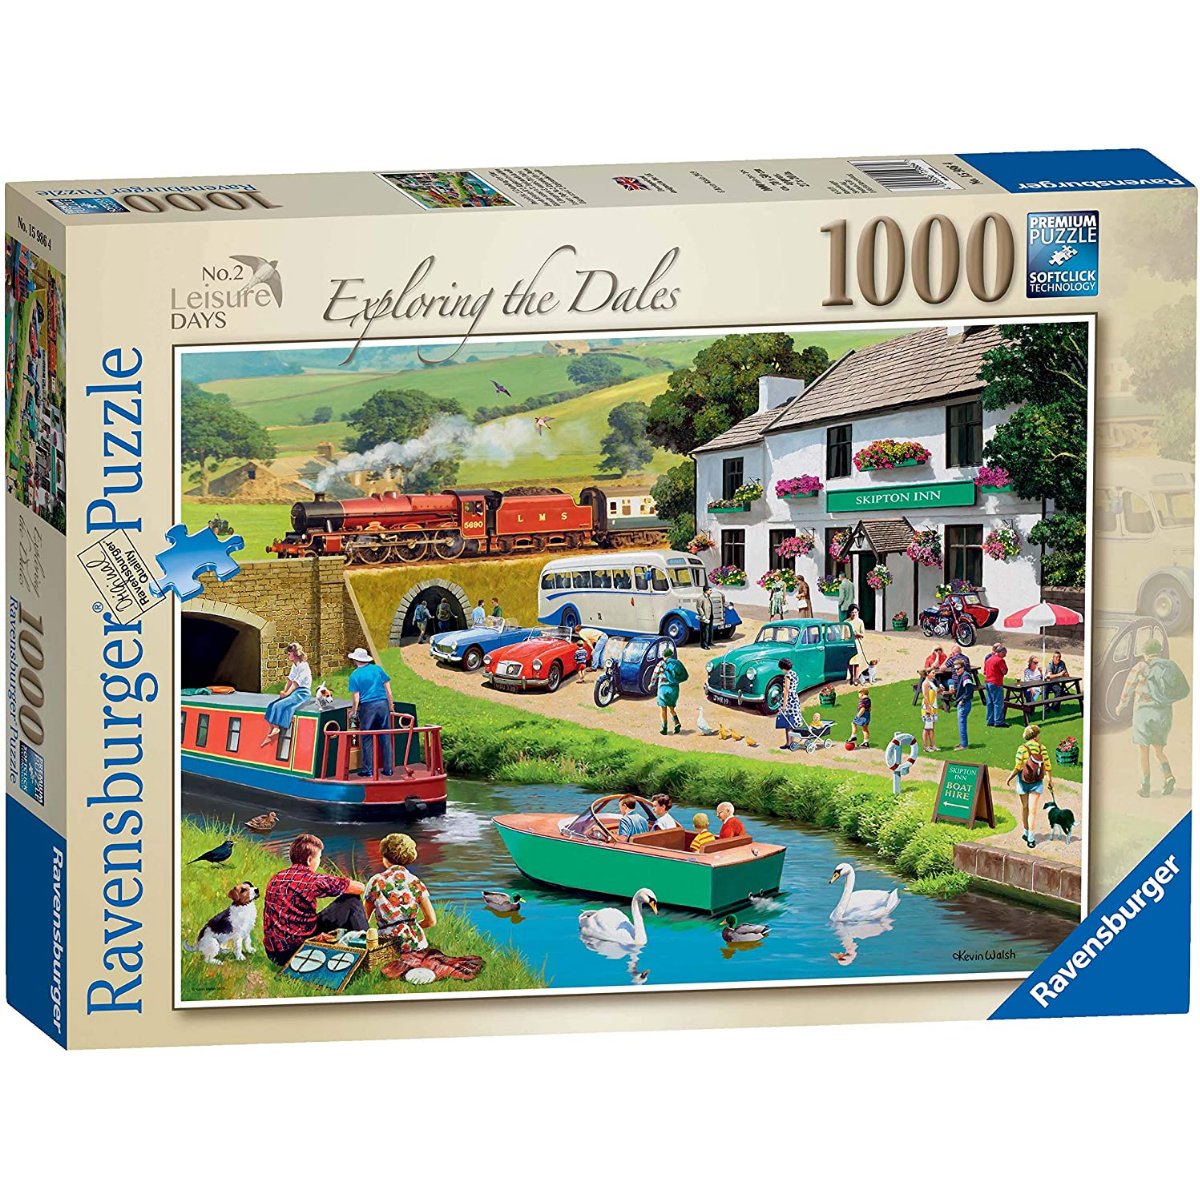 Ravensburger Leisure Days No 2, Exploring the Dales 1000 Piece Jigsaw Puzzle - Phillips Hobbies